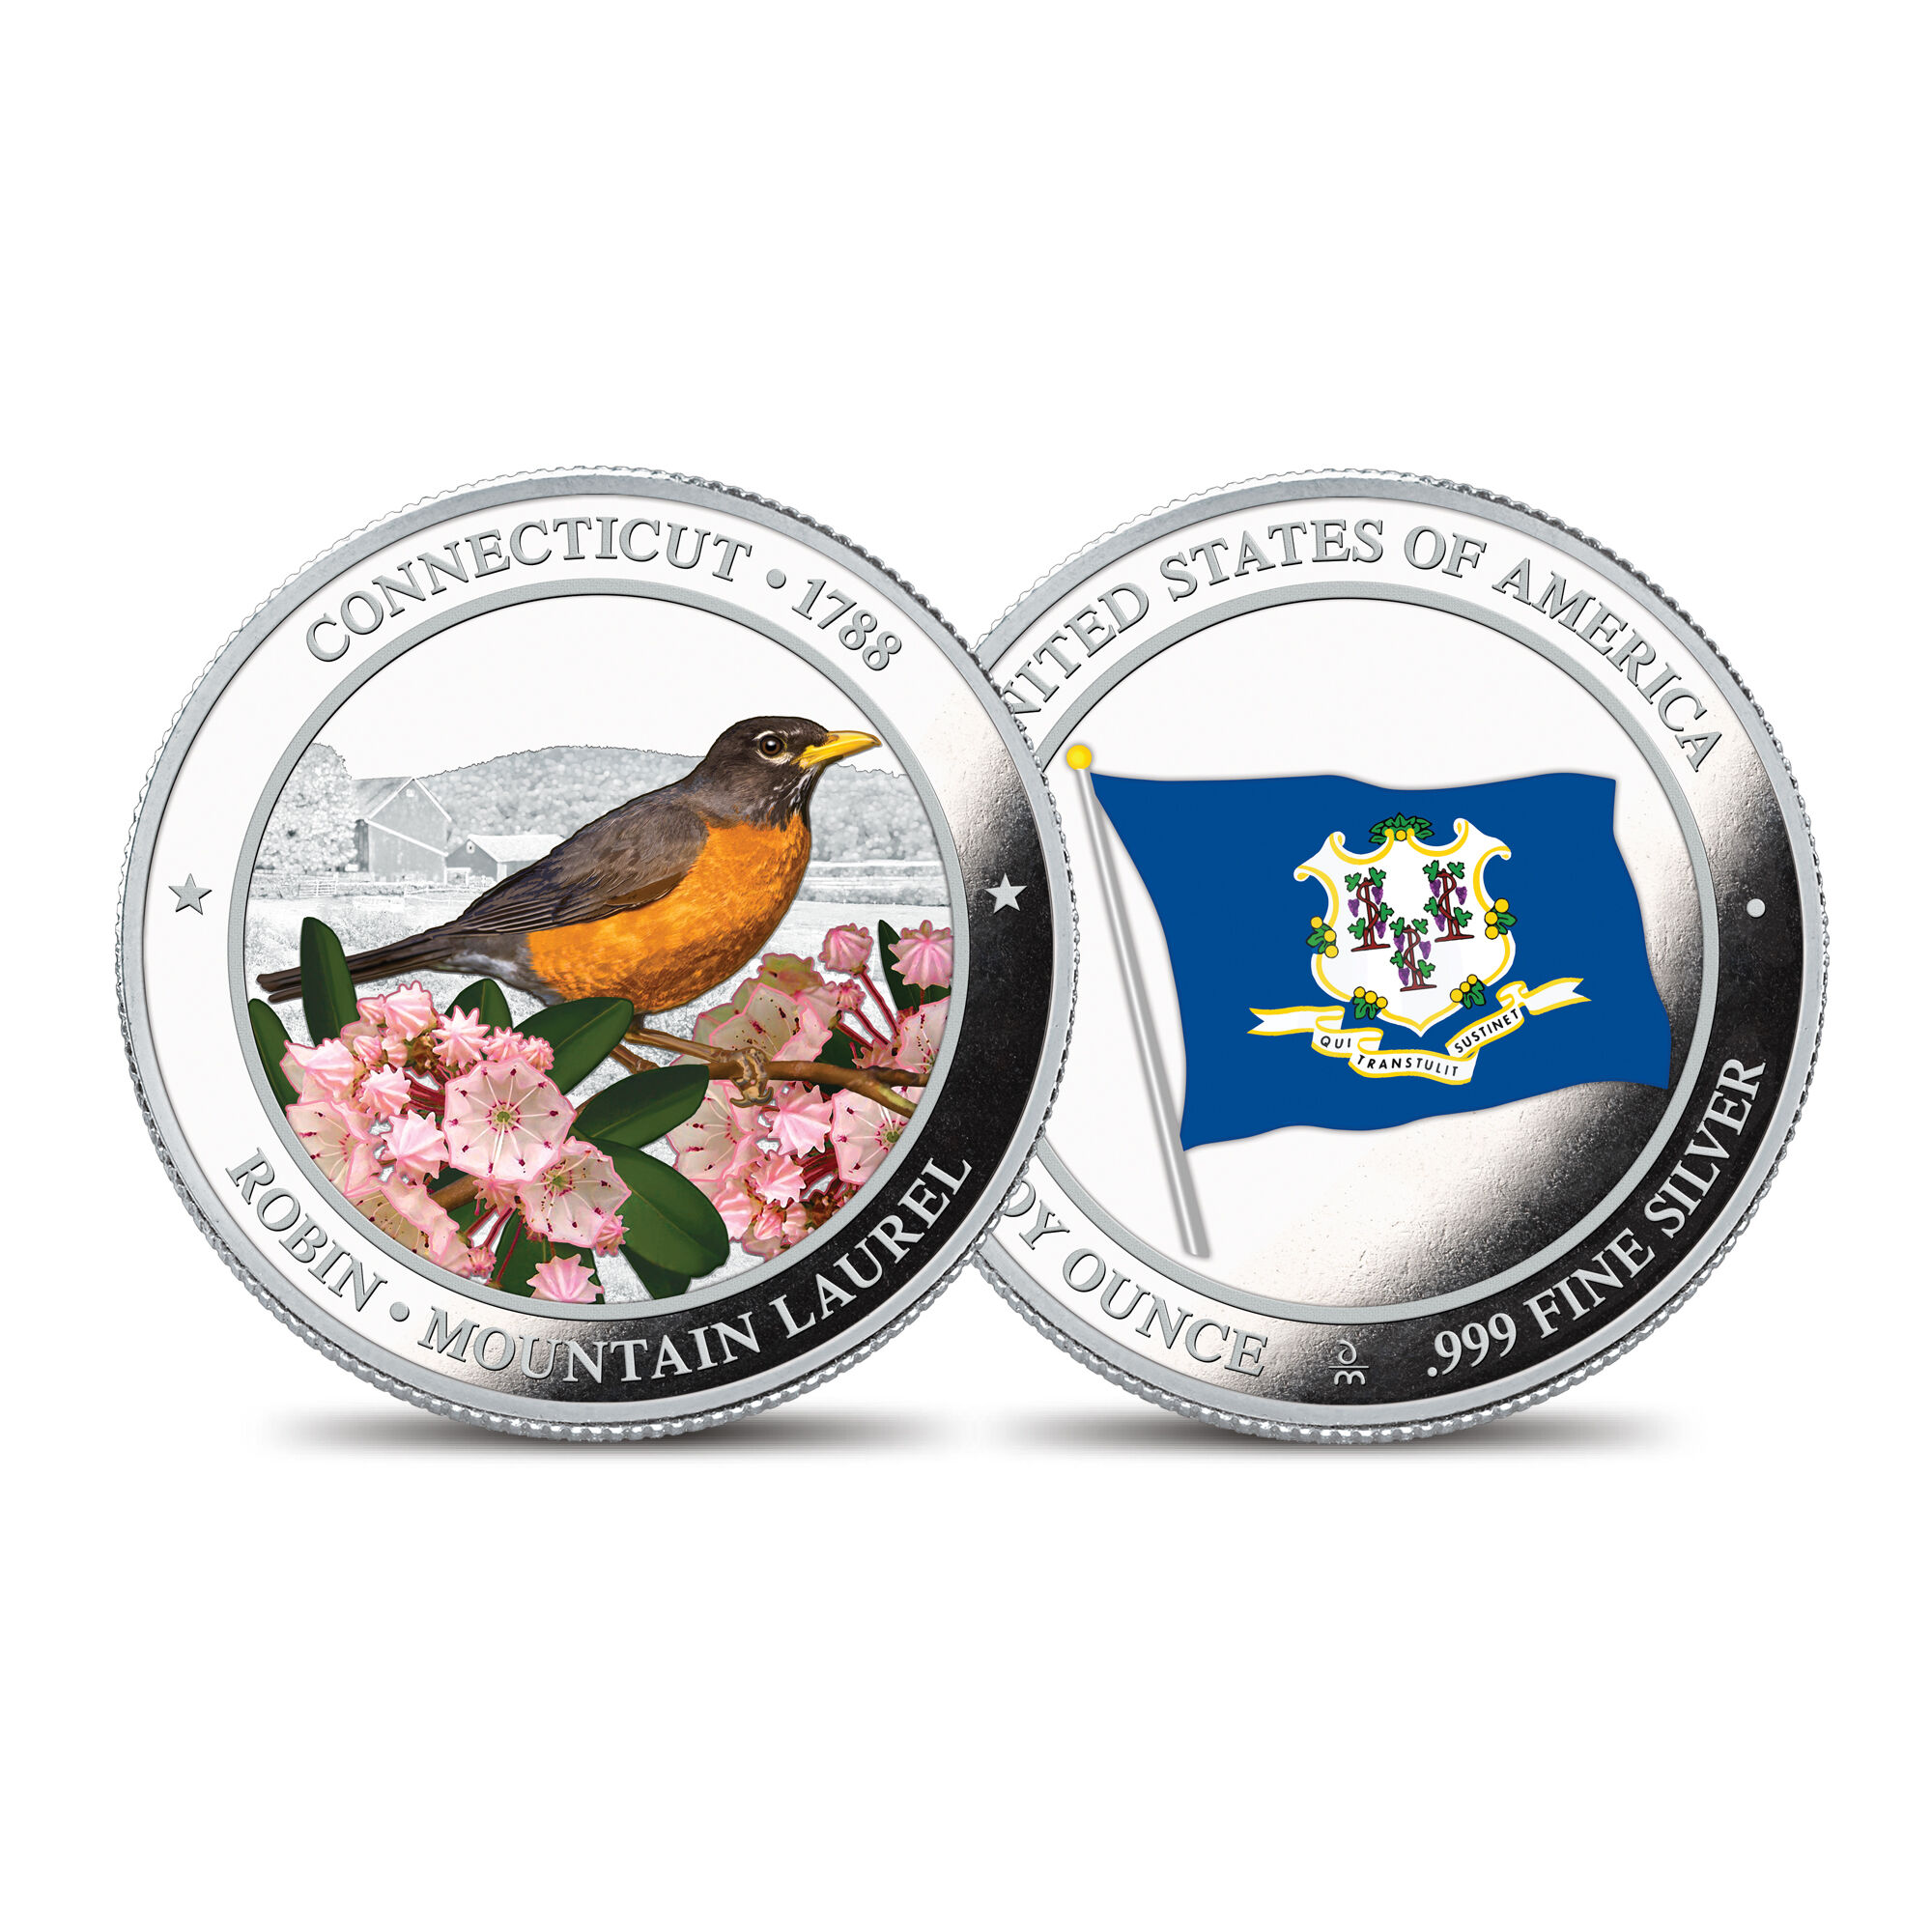 The State Bird and Flower Silver Commemoratives 2167 0088 a commemorativeCT